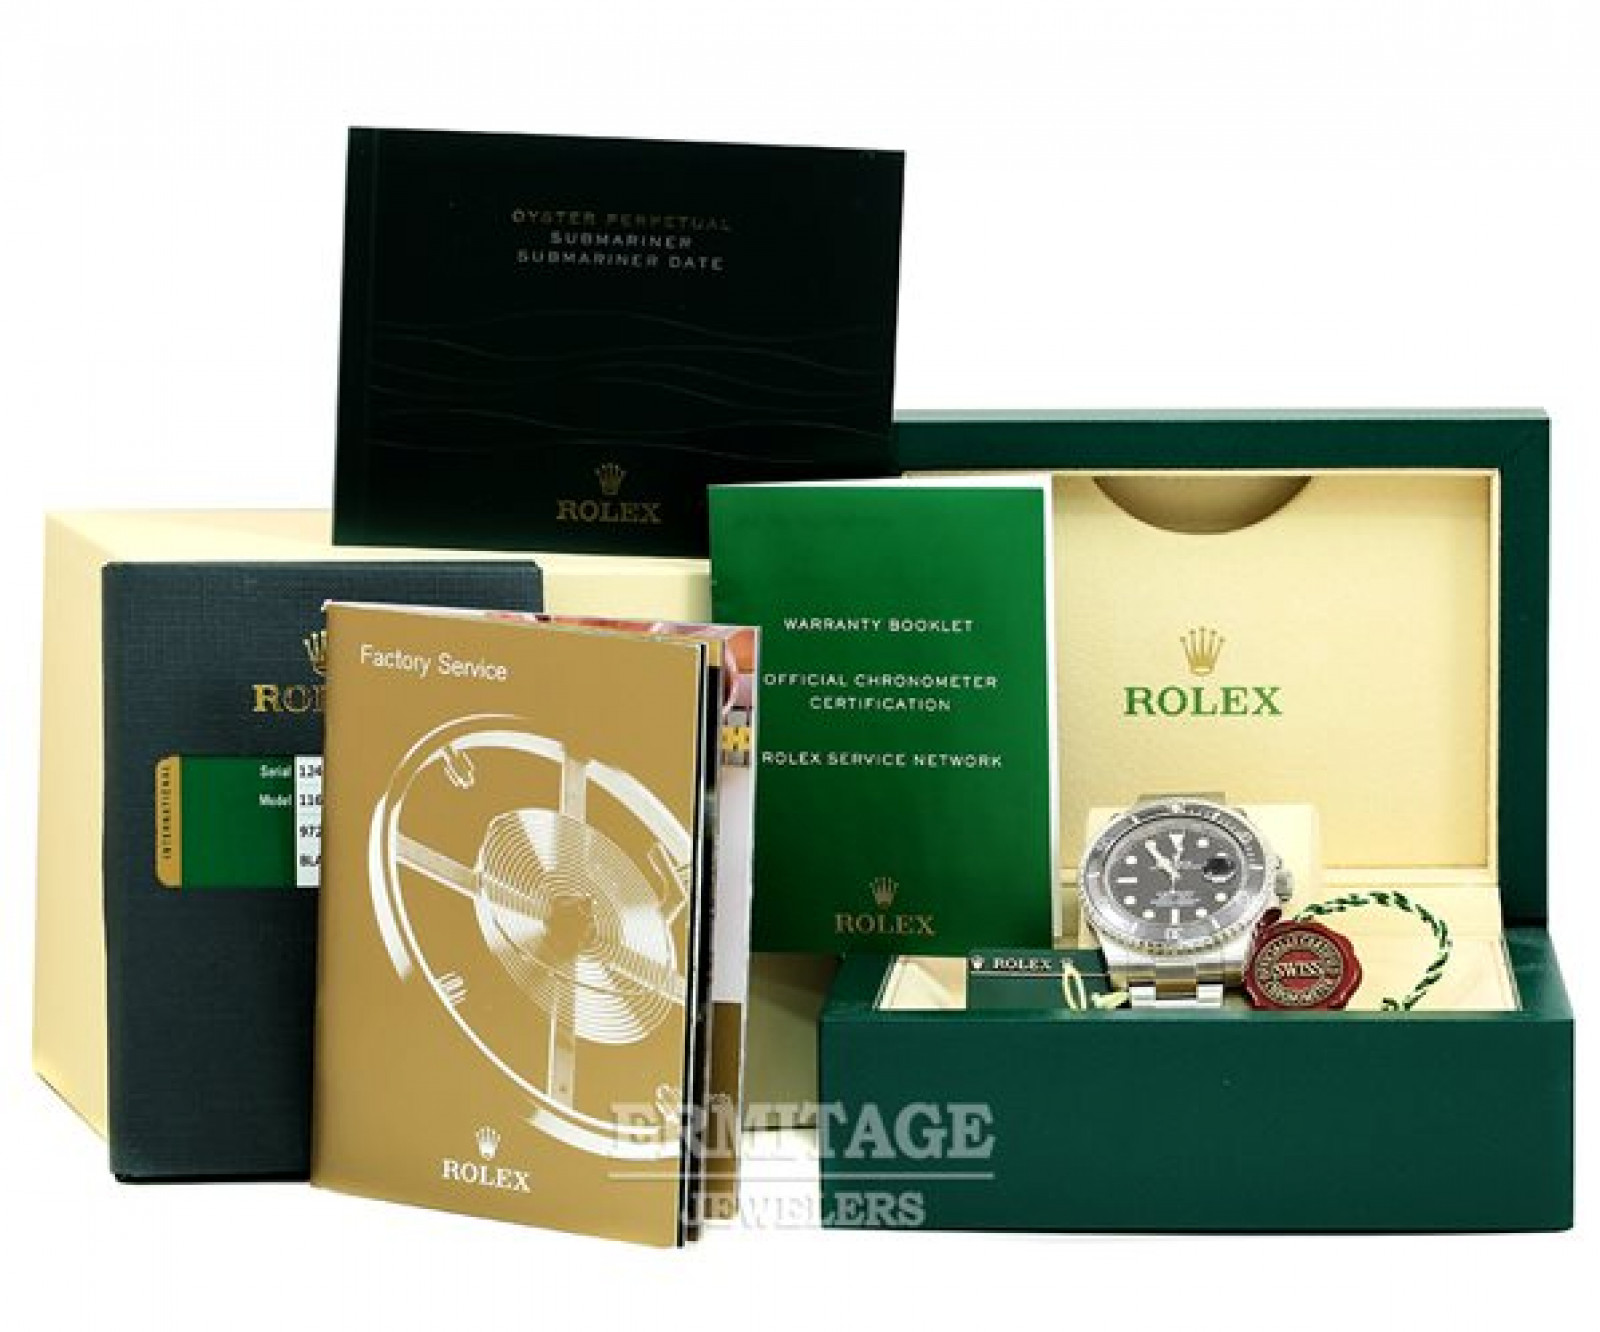 Pre-Owned Steel Rolex Submariner 116610